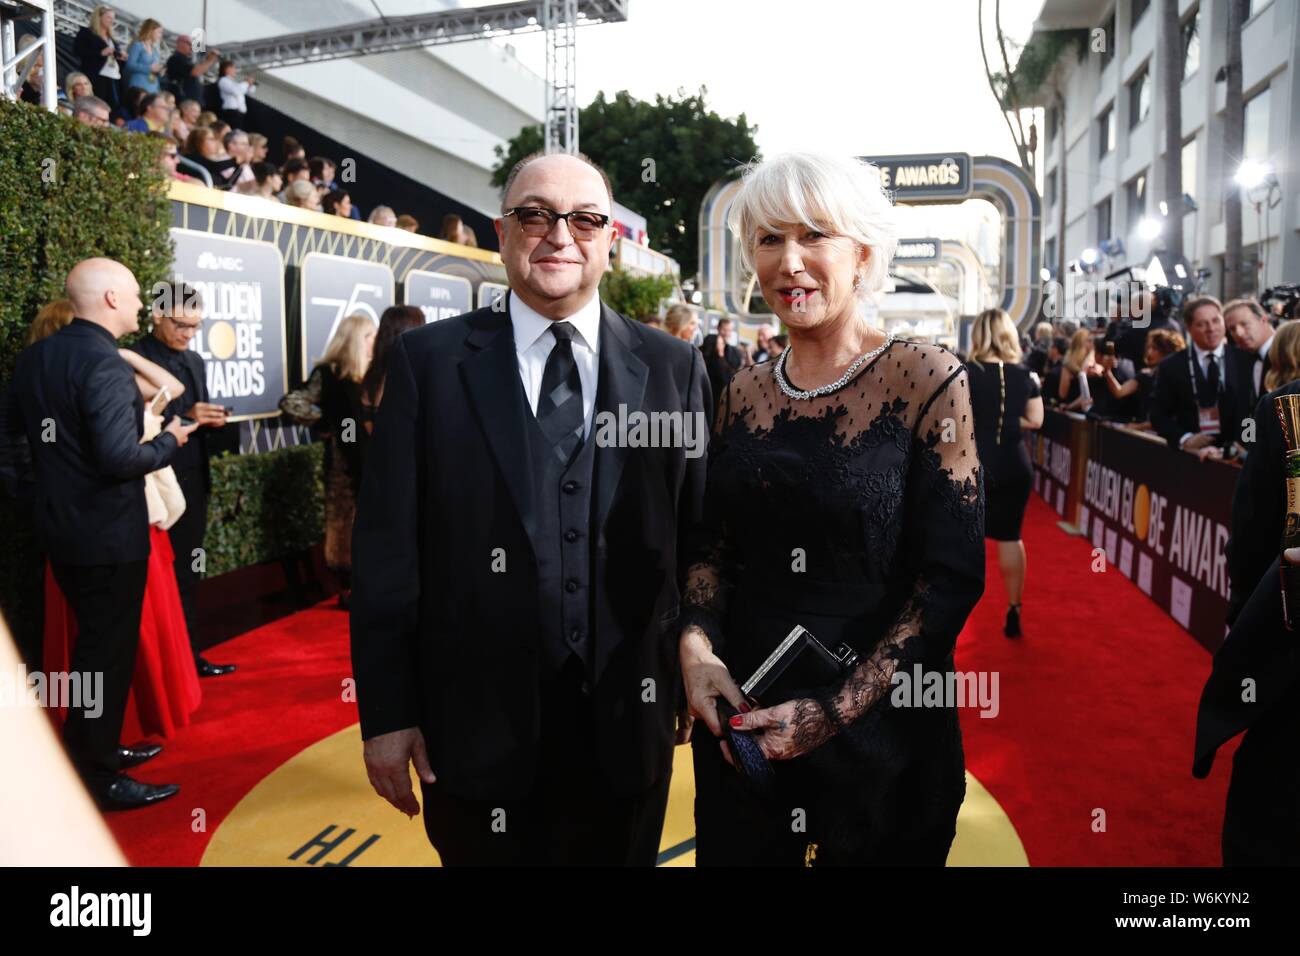 English actress Helen Mirren, right, arrives on the red carpet for the 75th Golden Globe Awards in Los Angeles, California, U.S., 7 January 2018. Stock Photo